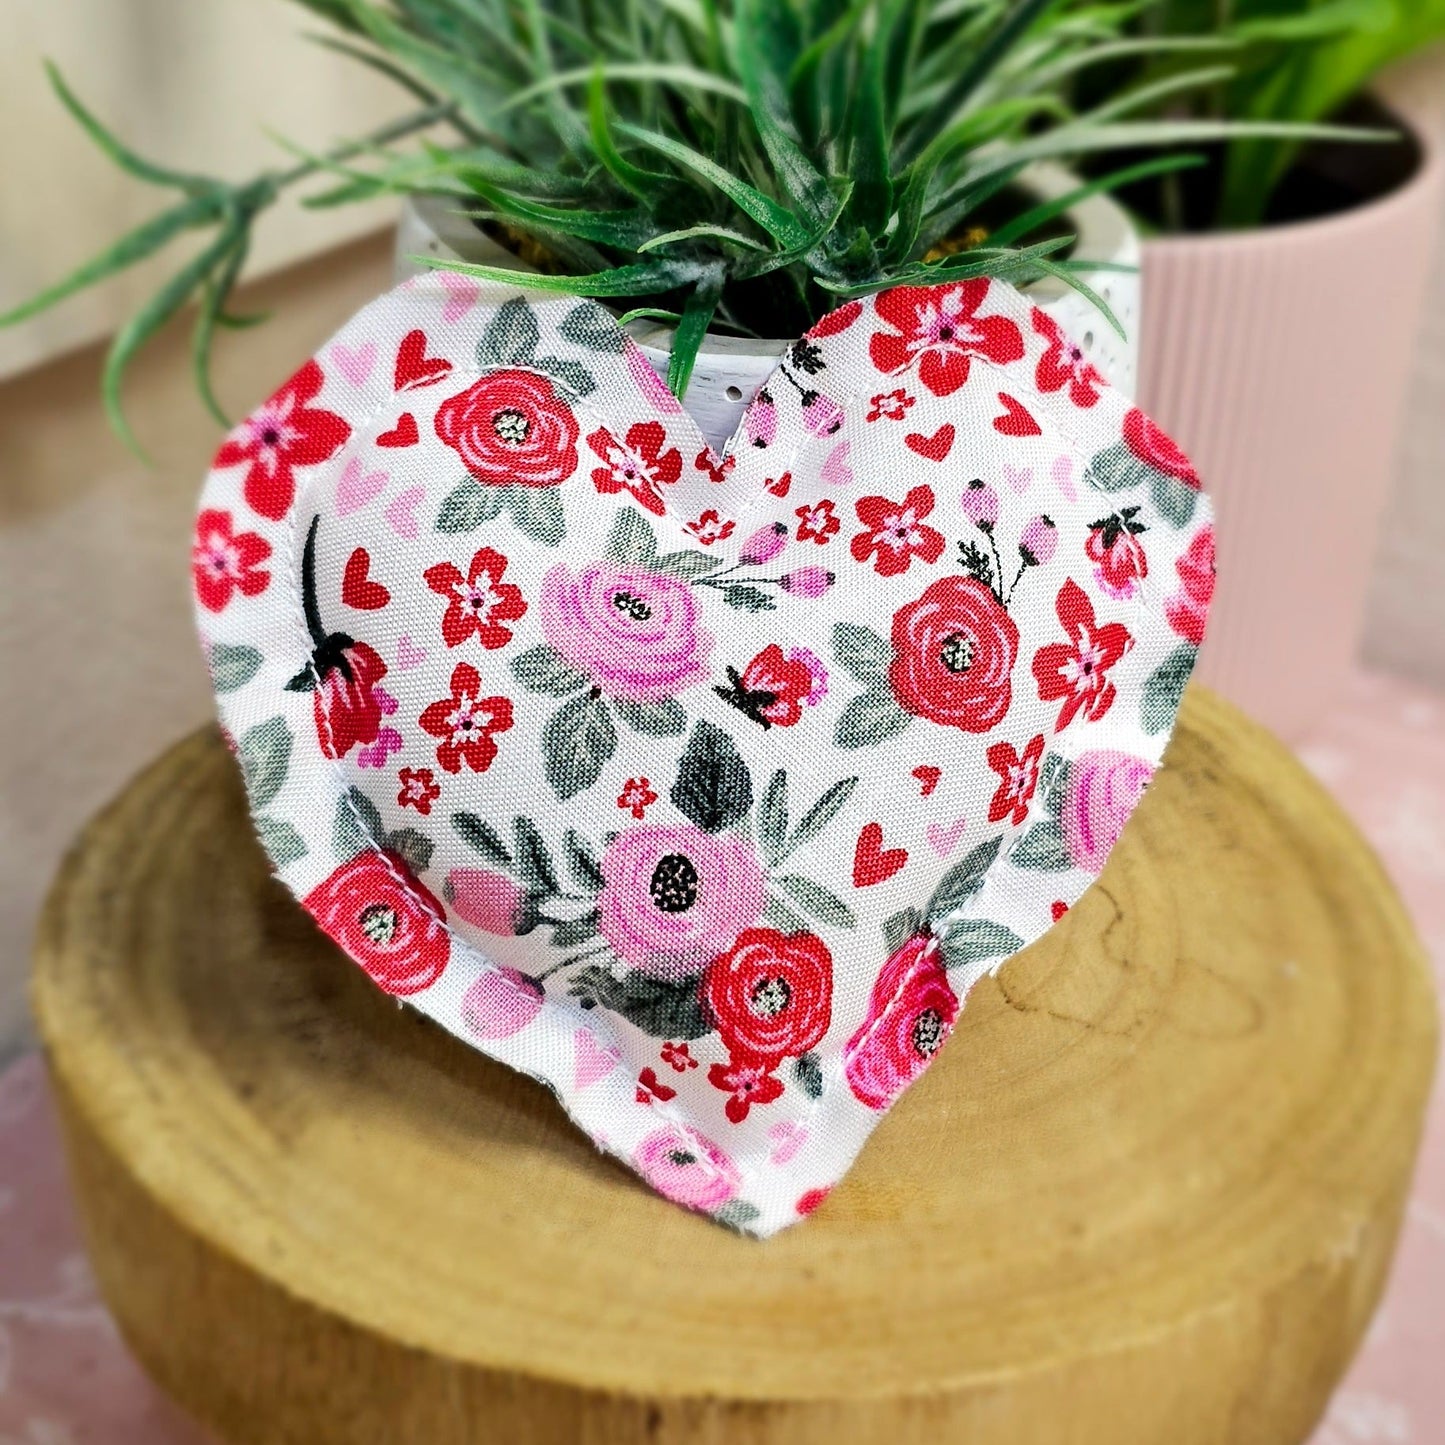 Red Roses Mini Plush Heart Pillow, Tiered Tray Decor Fillers